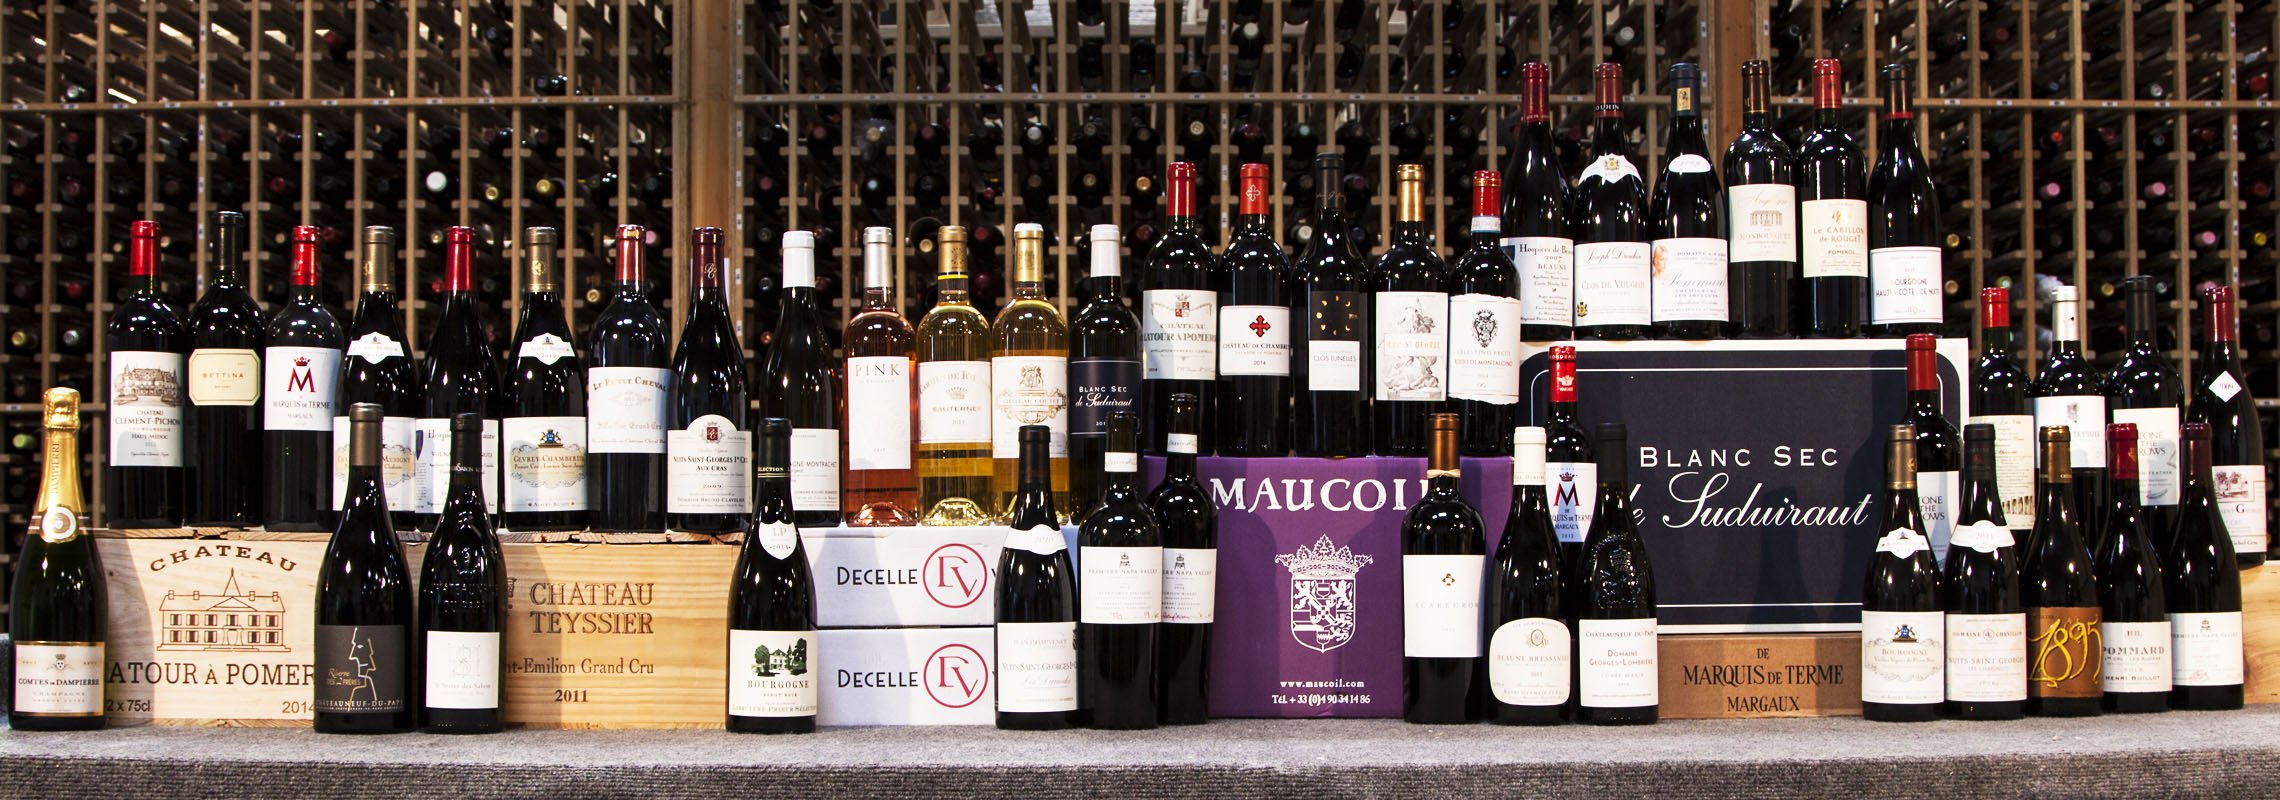 How to Sell Some or All of Your Wine Collection